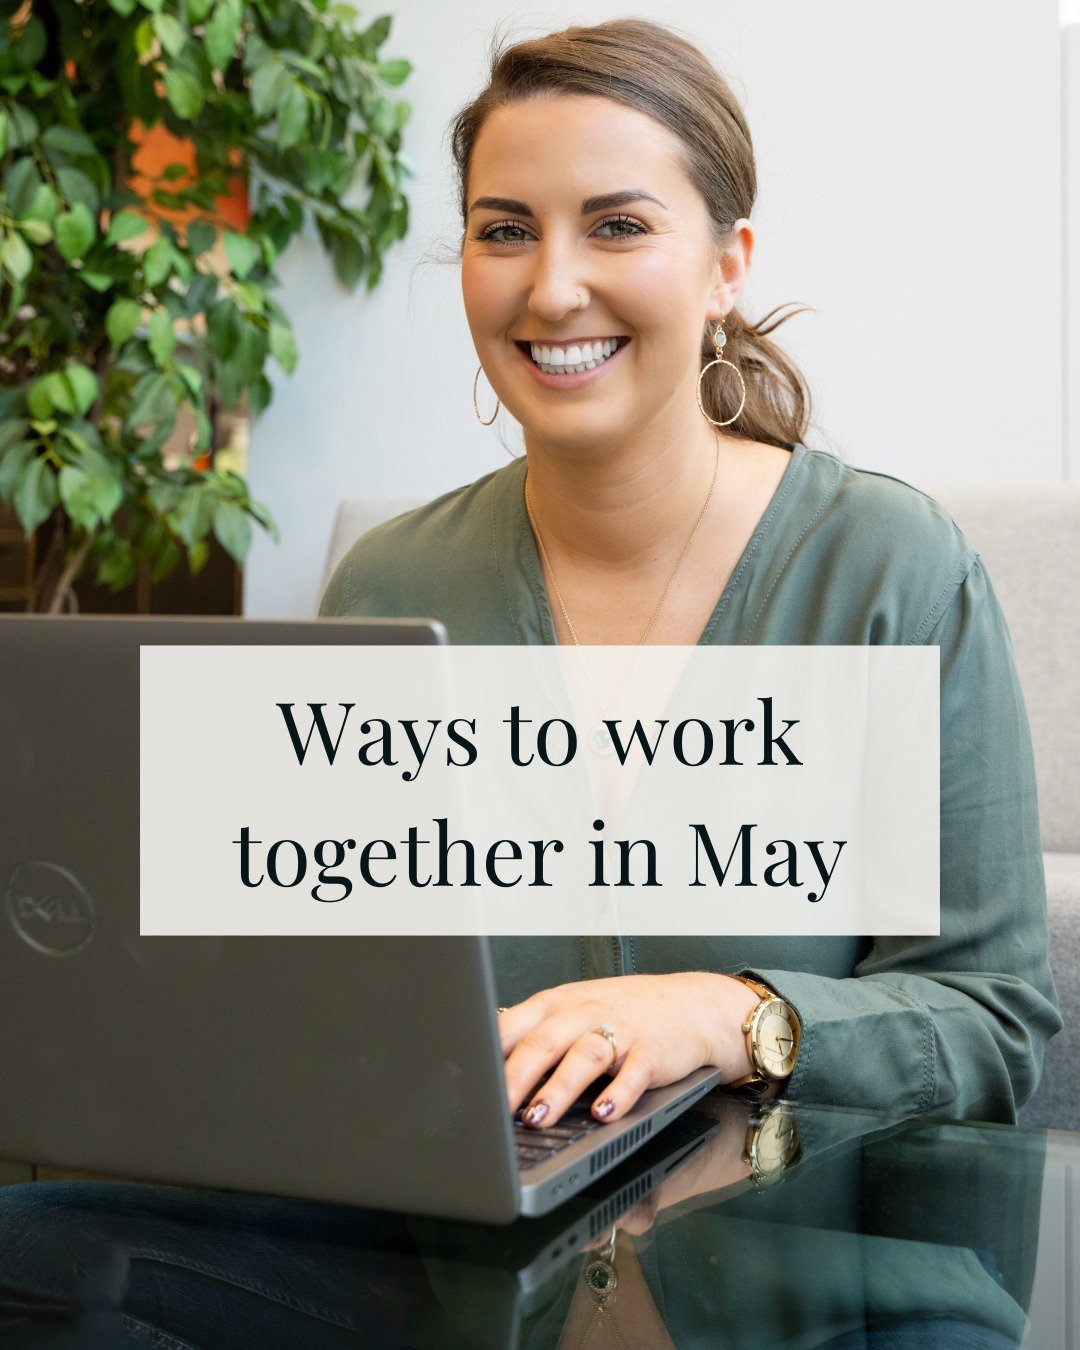 Swipe for ways we can work together in May &gt;&gt;&gt;

Send me a DM to chat more about your options 🌸

.
.
.
.
.

#businesscoaches #businessstrategies #businesssystems #dubsado #womeninbusinesss #dubsadocrm #dubsadosetup #dubsadopro #clientexperie